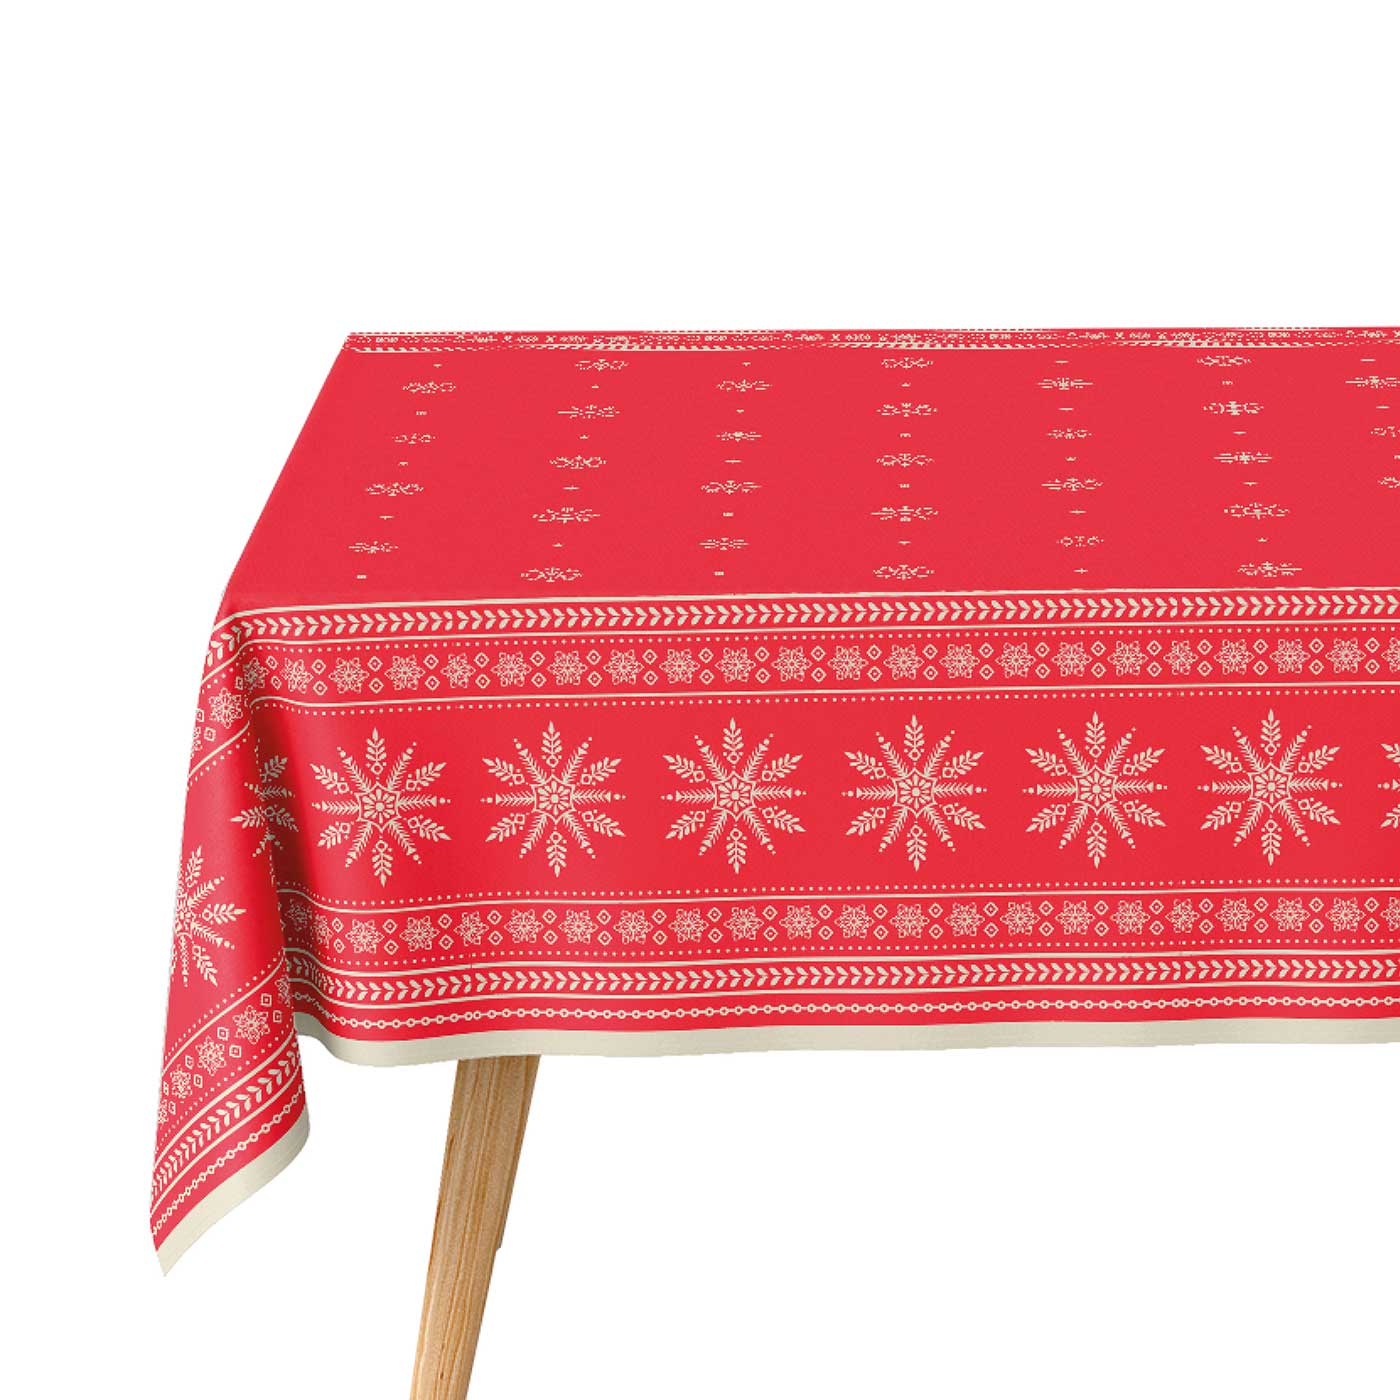 Roll Christmas tablecloth snowflake 1.20 x 2.50 m red